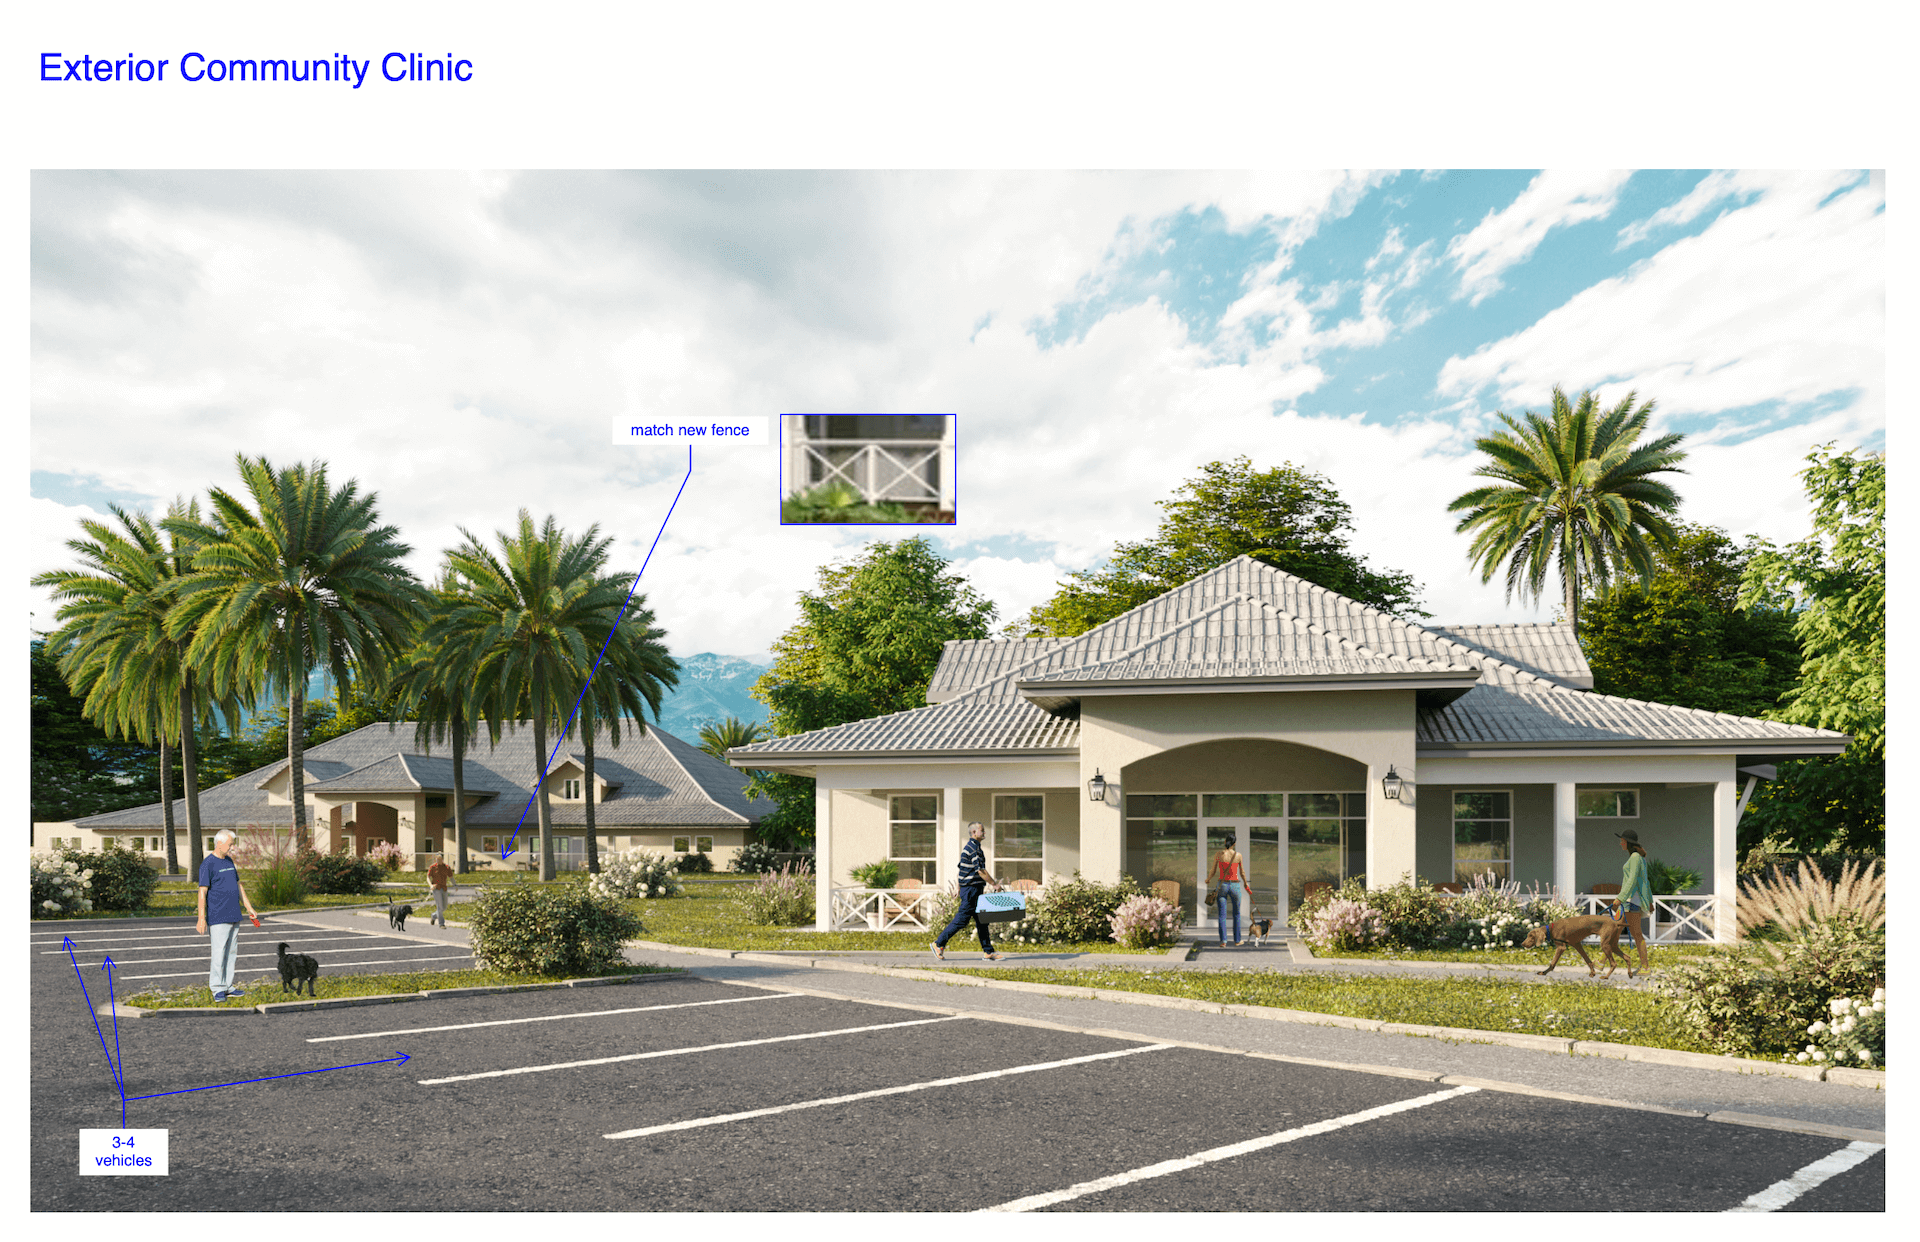 Client’s Notes on the Draft 3D Rendering of the Clinic